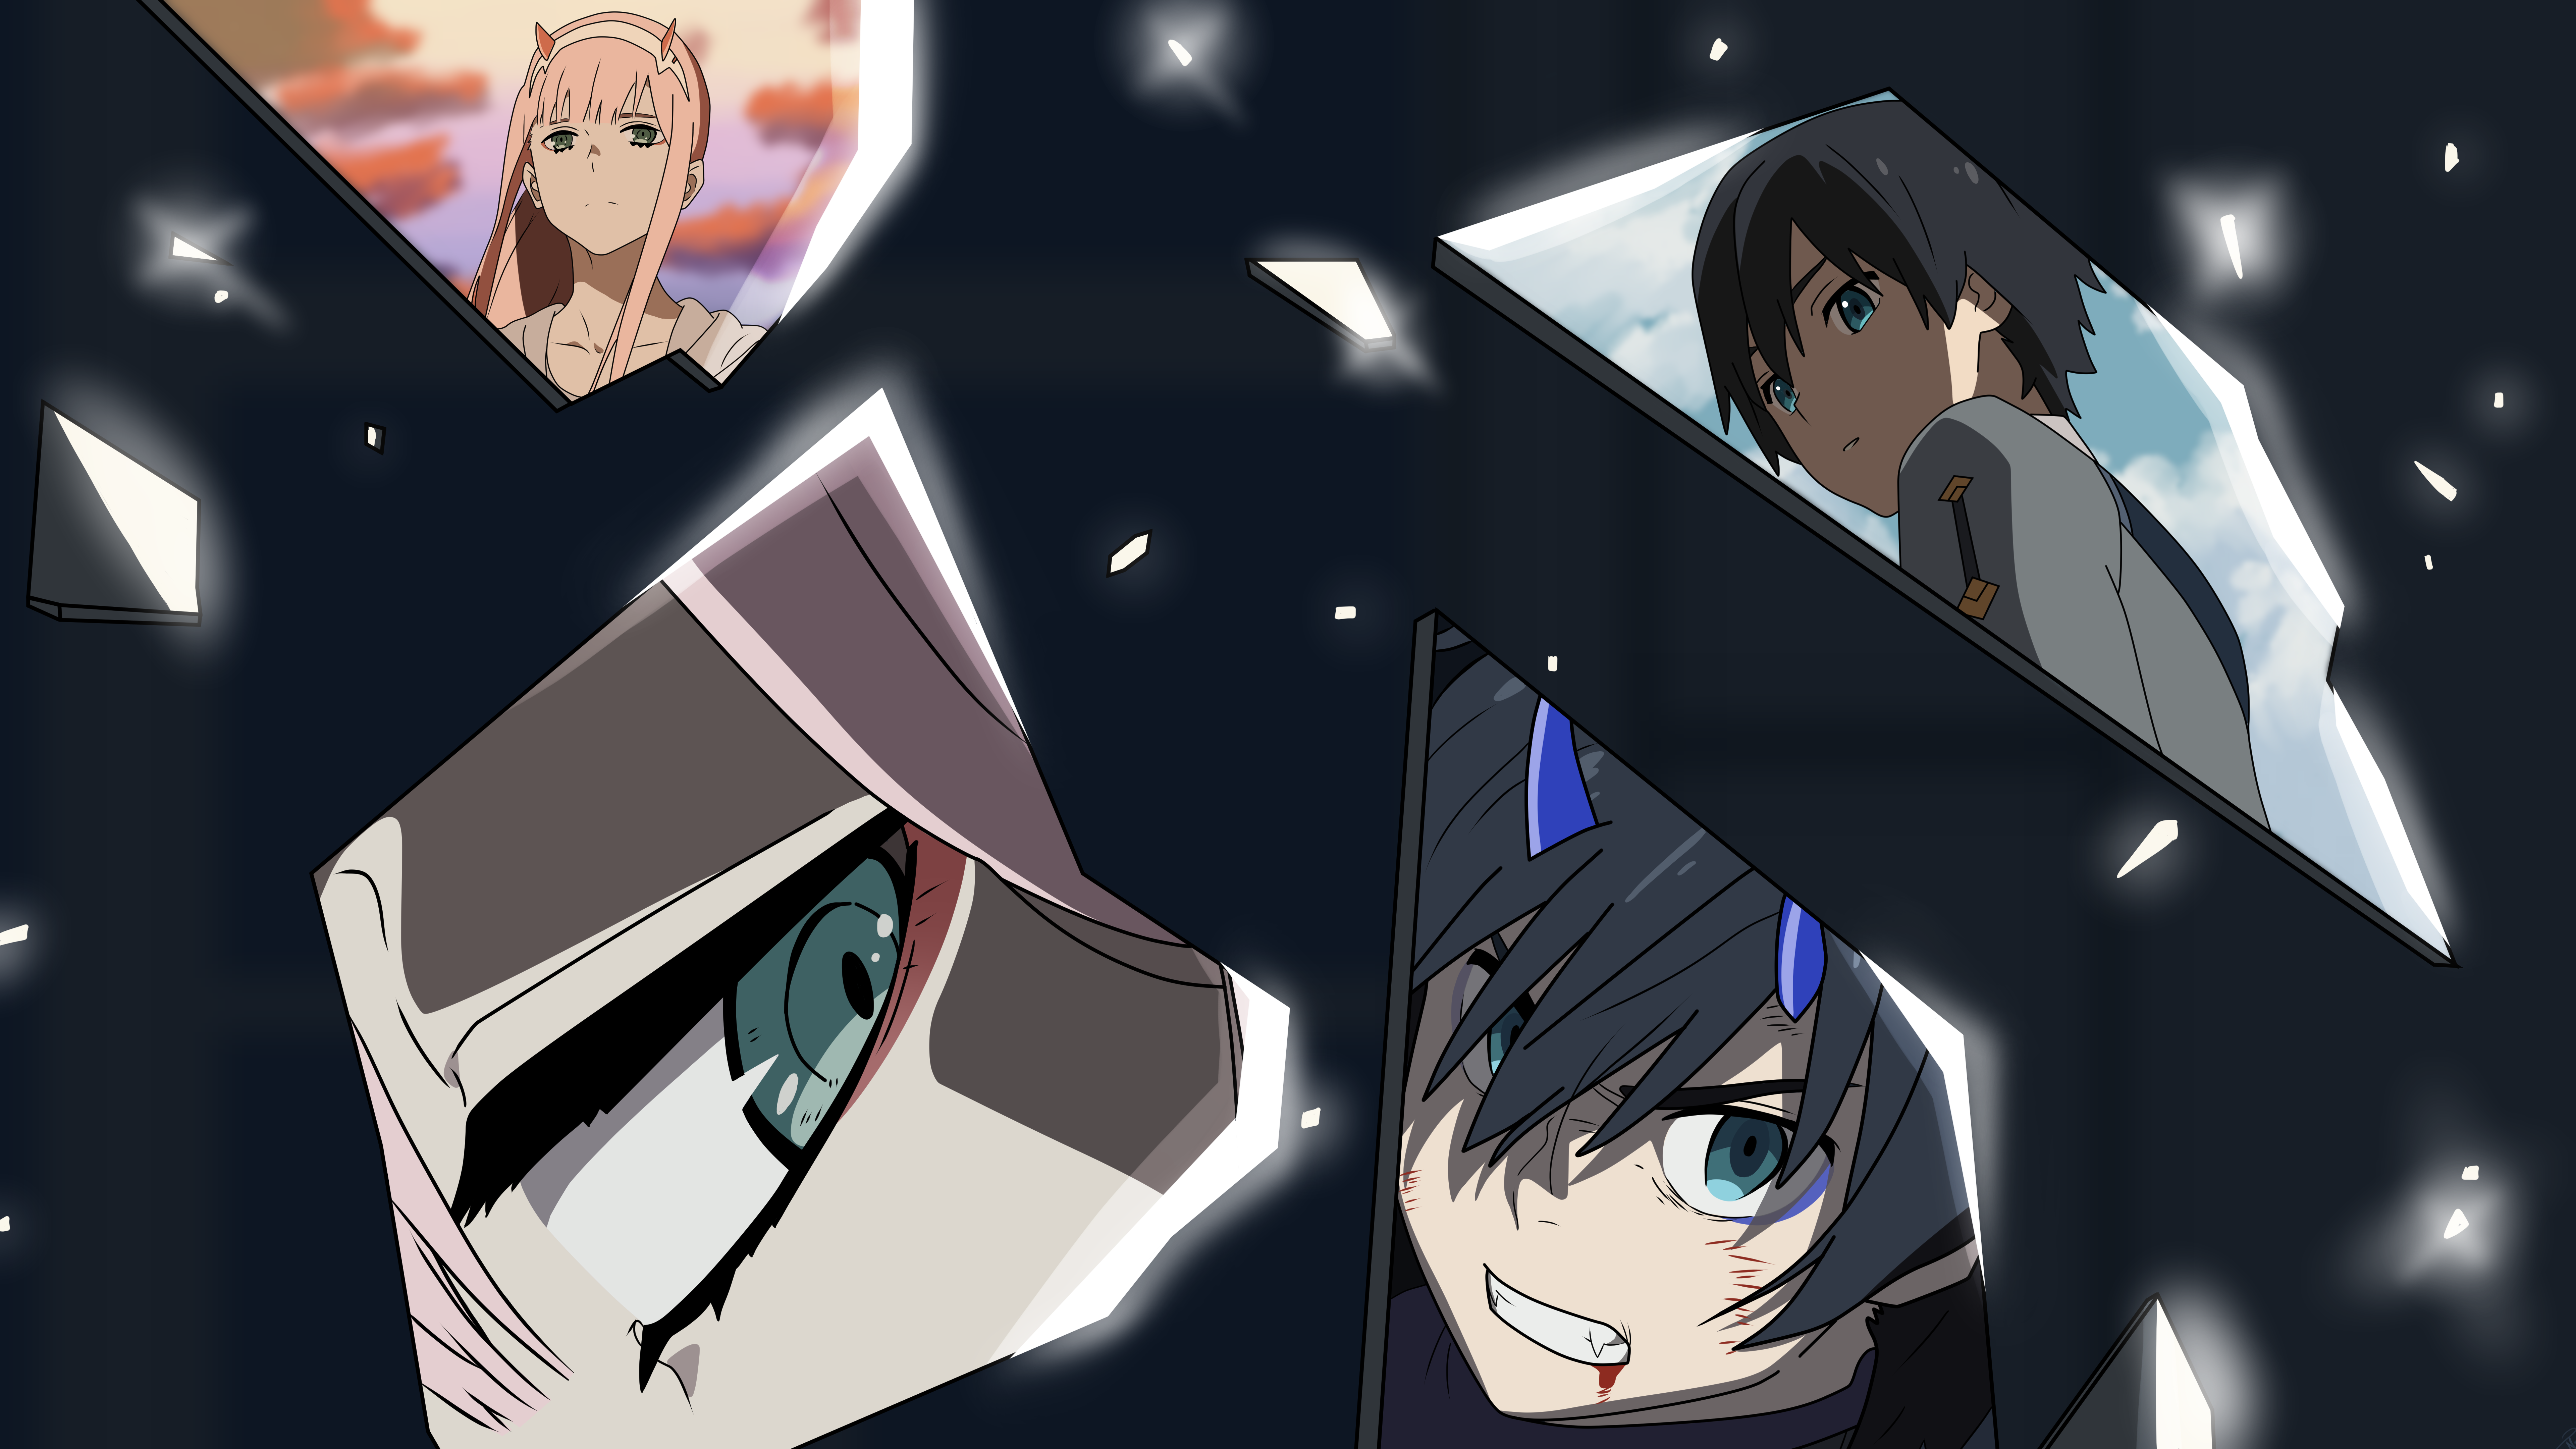 Hiro and Zero Two Moments In Broken Glass by Bladedvaults92